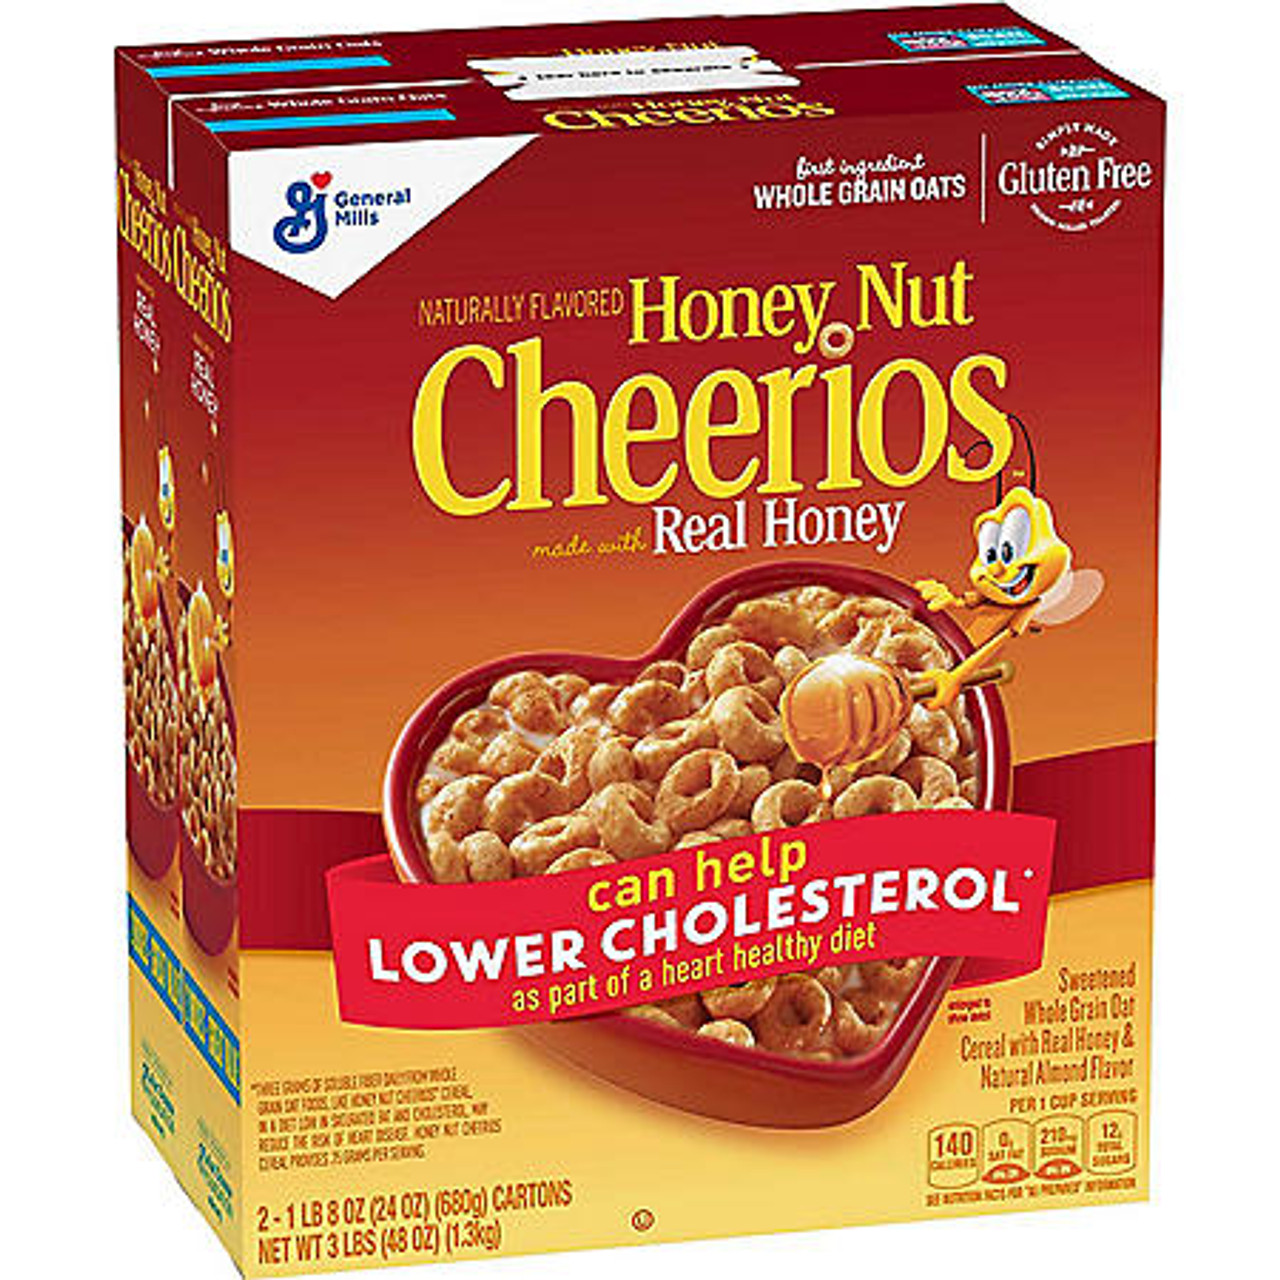 Honey Nut Cheerios Gluten-Free Cereal (24 oz., 2 pk.) - [From 41.00 - Choose pk Qty ] - *Ships from Miami